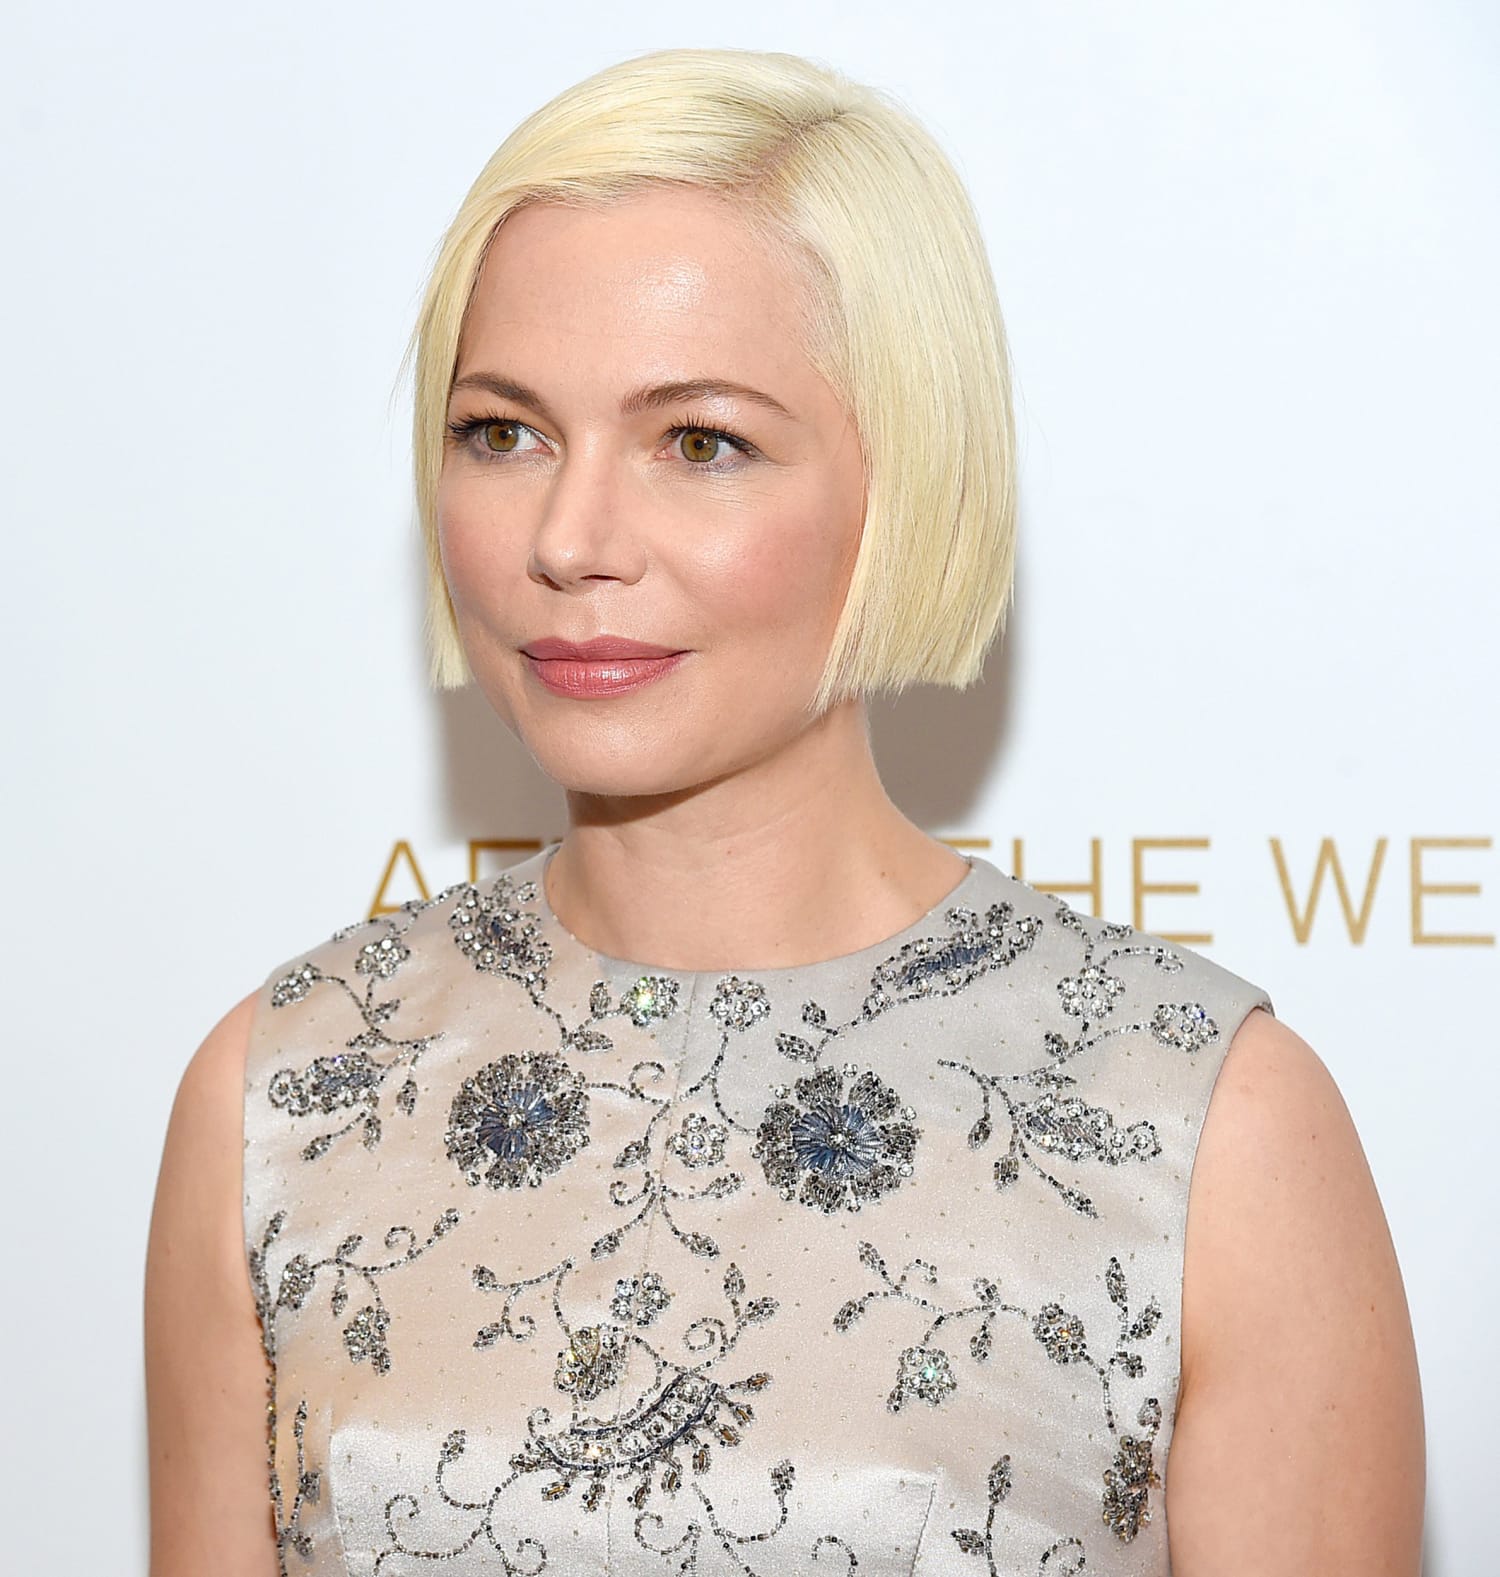 Image of Michelle Williams with blunt bob